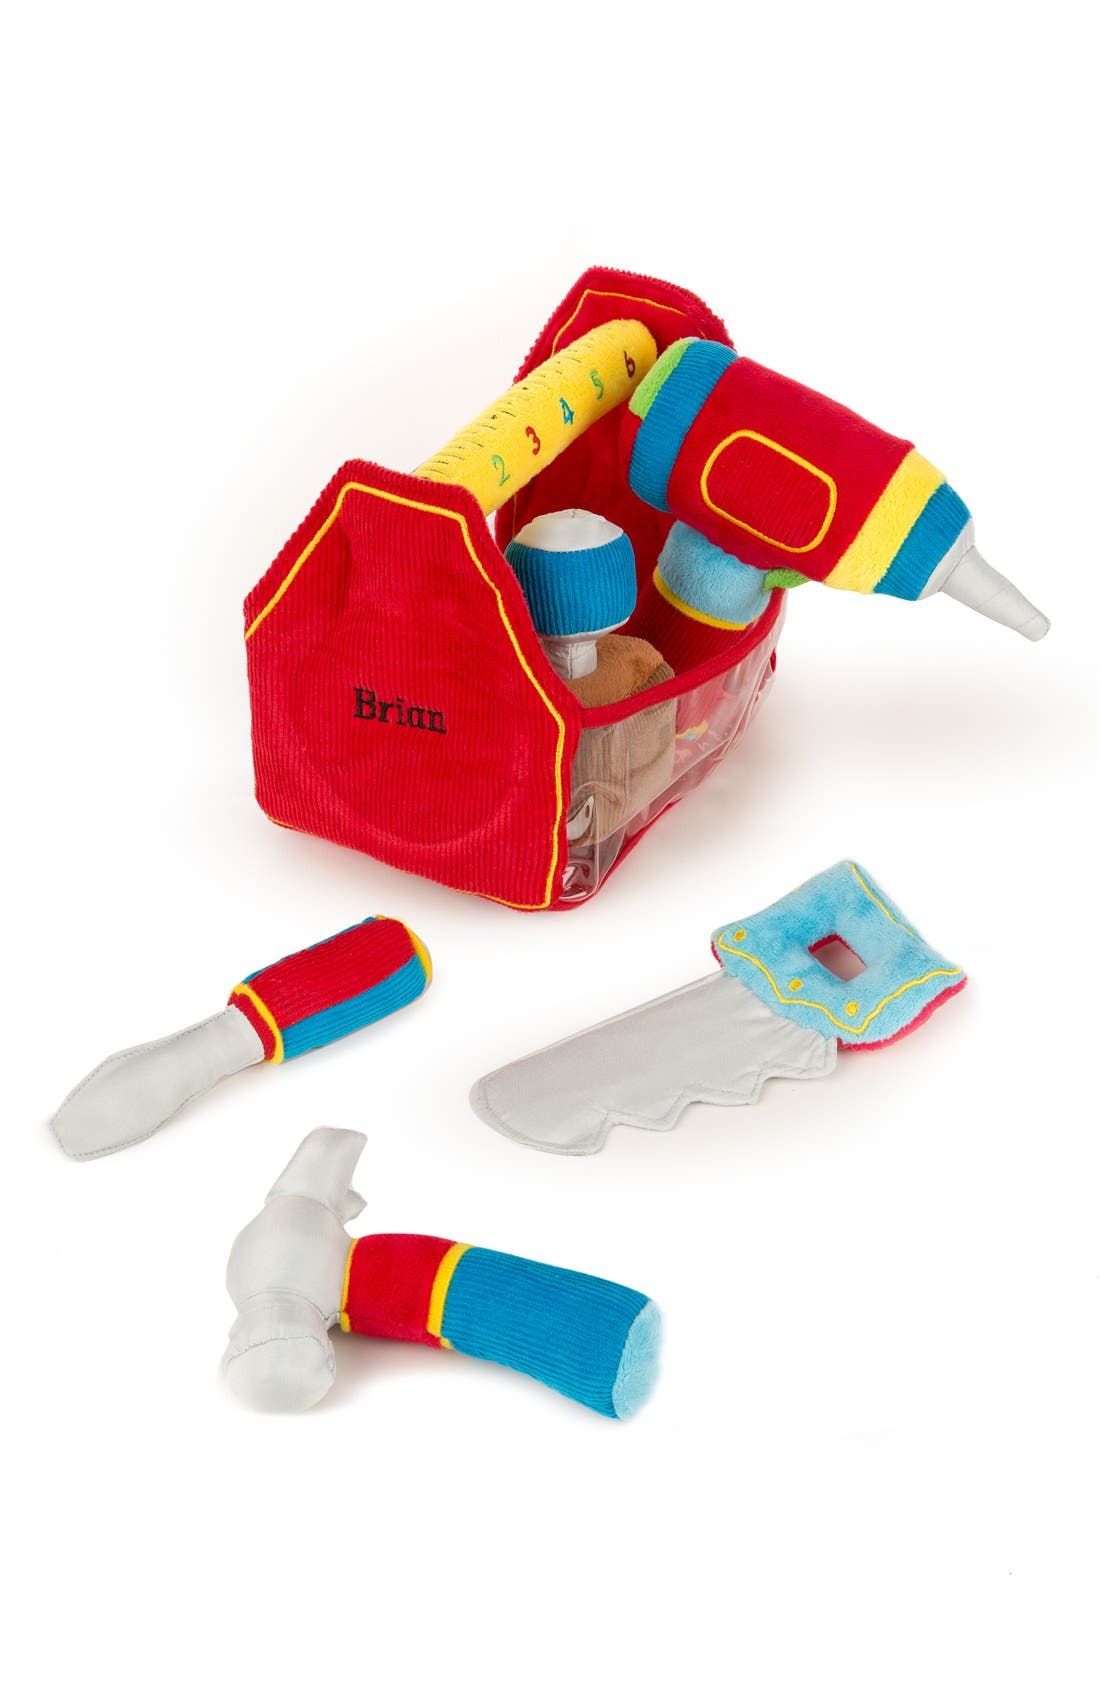 melissa and doug toolbox fill and spill